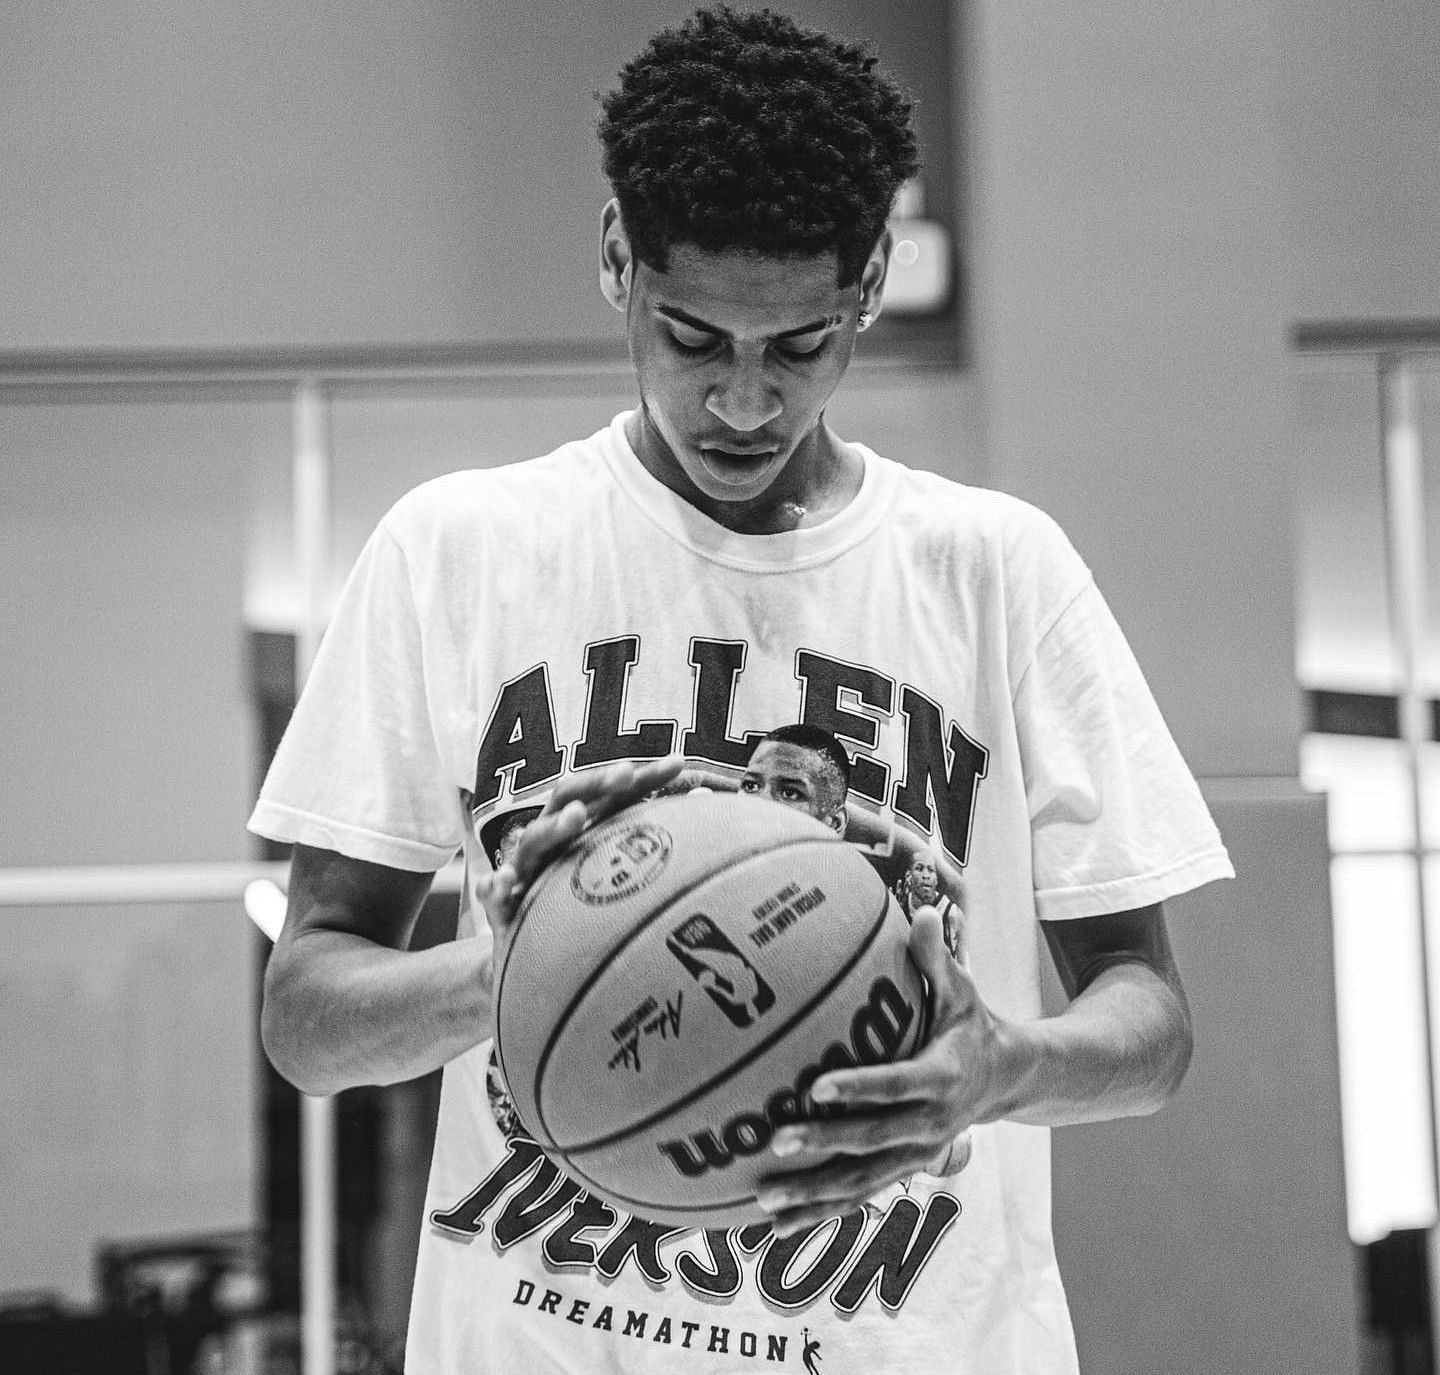 Kyan Anthony has received an offer from Syracuse (Image Credit Kiyan Anthony Instagram)